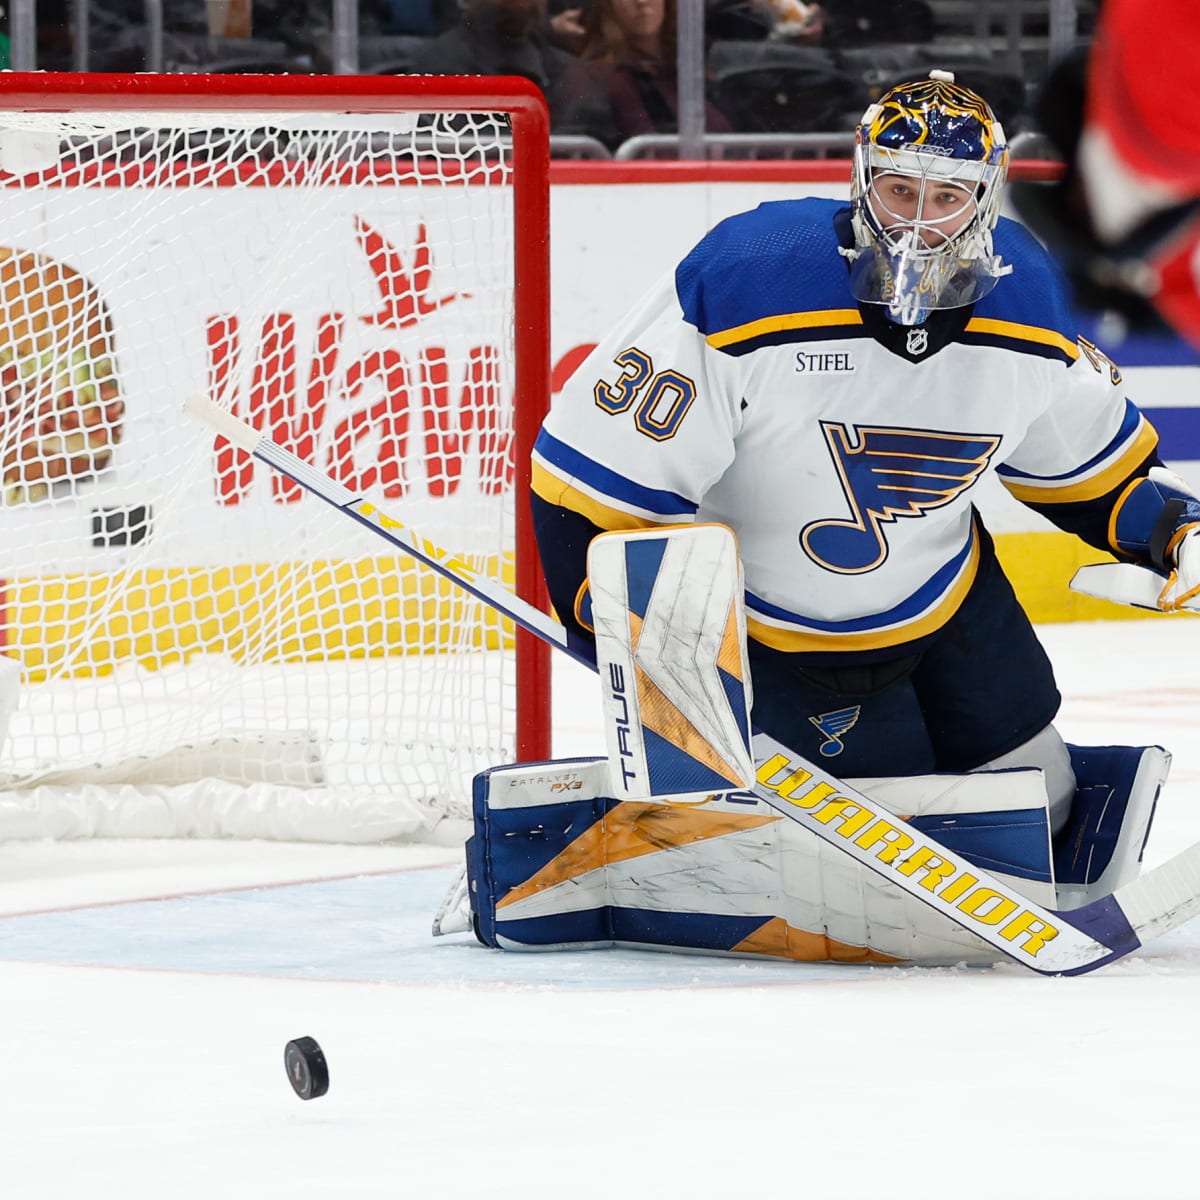 Binnington suspended 2 games for roughing, unsportsmanlike conduct